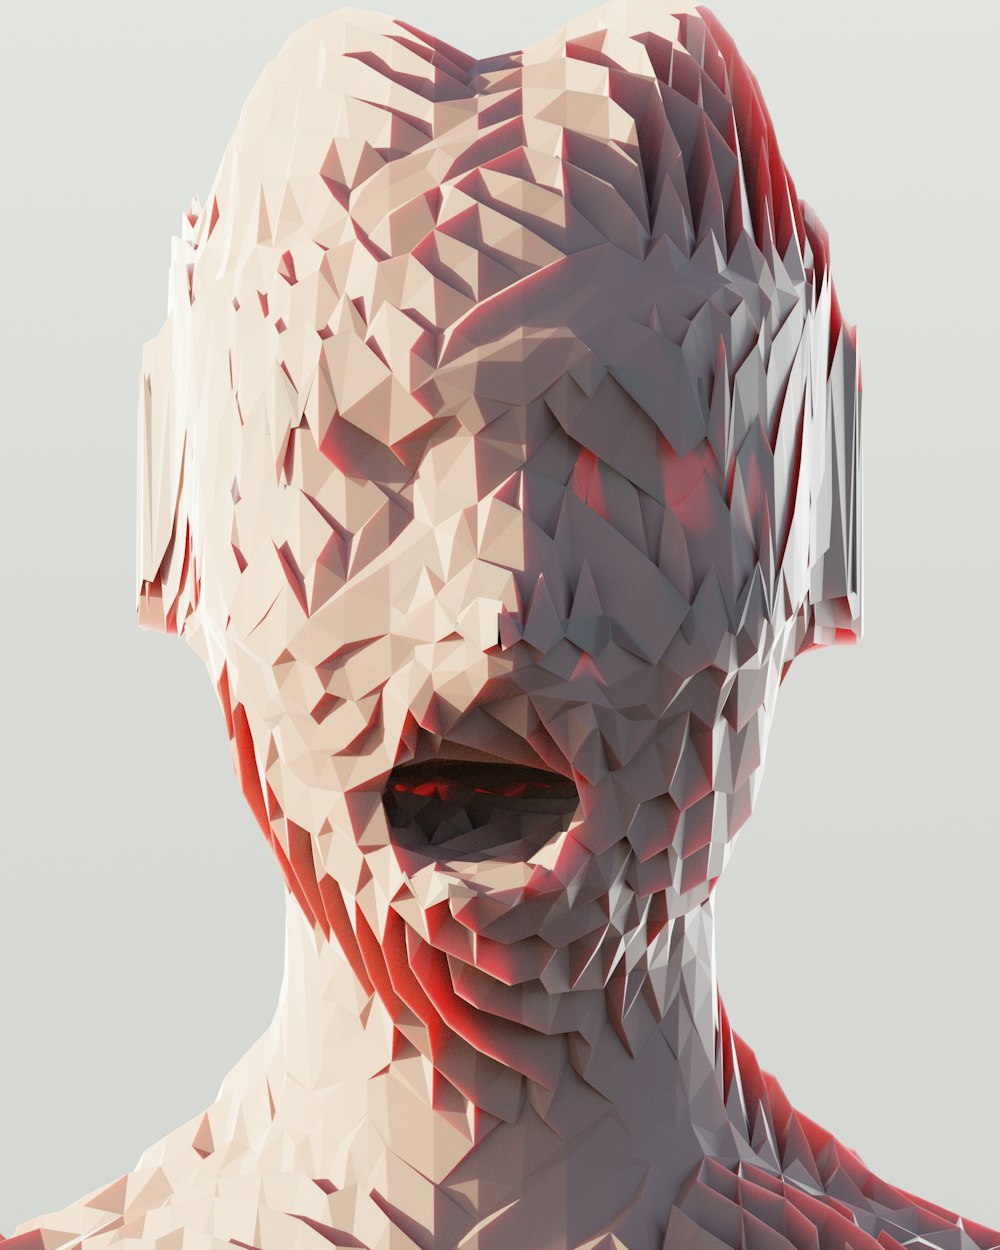 a 3d image of a woman's face and neck